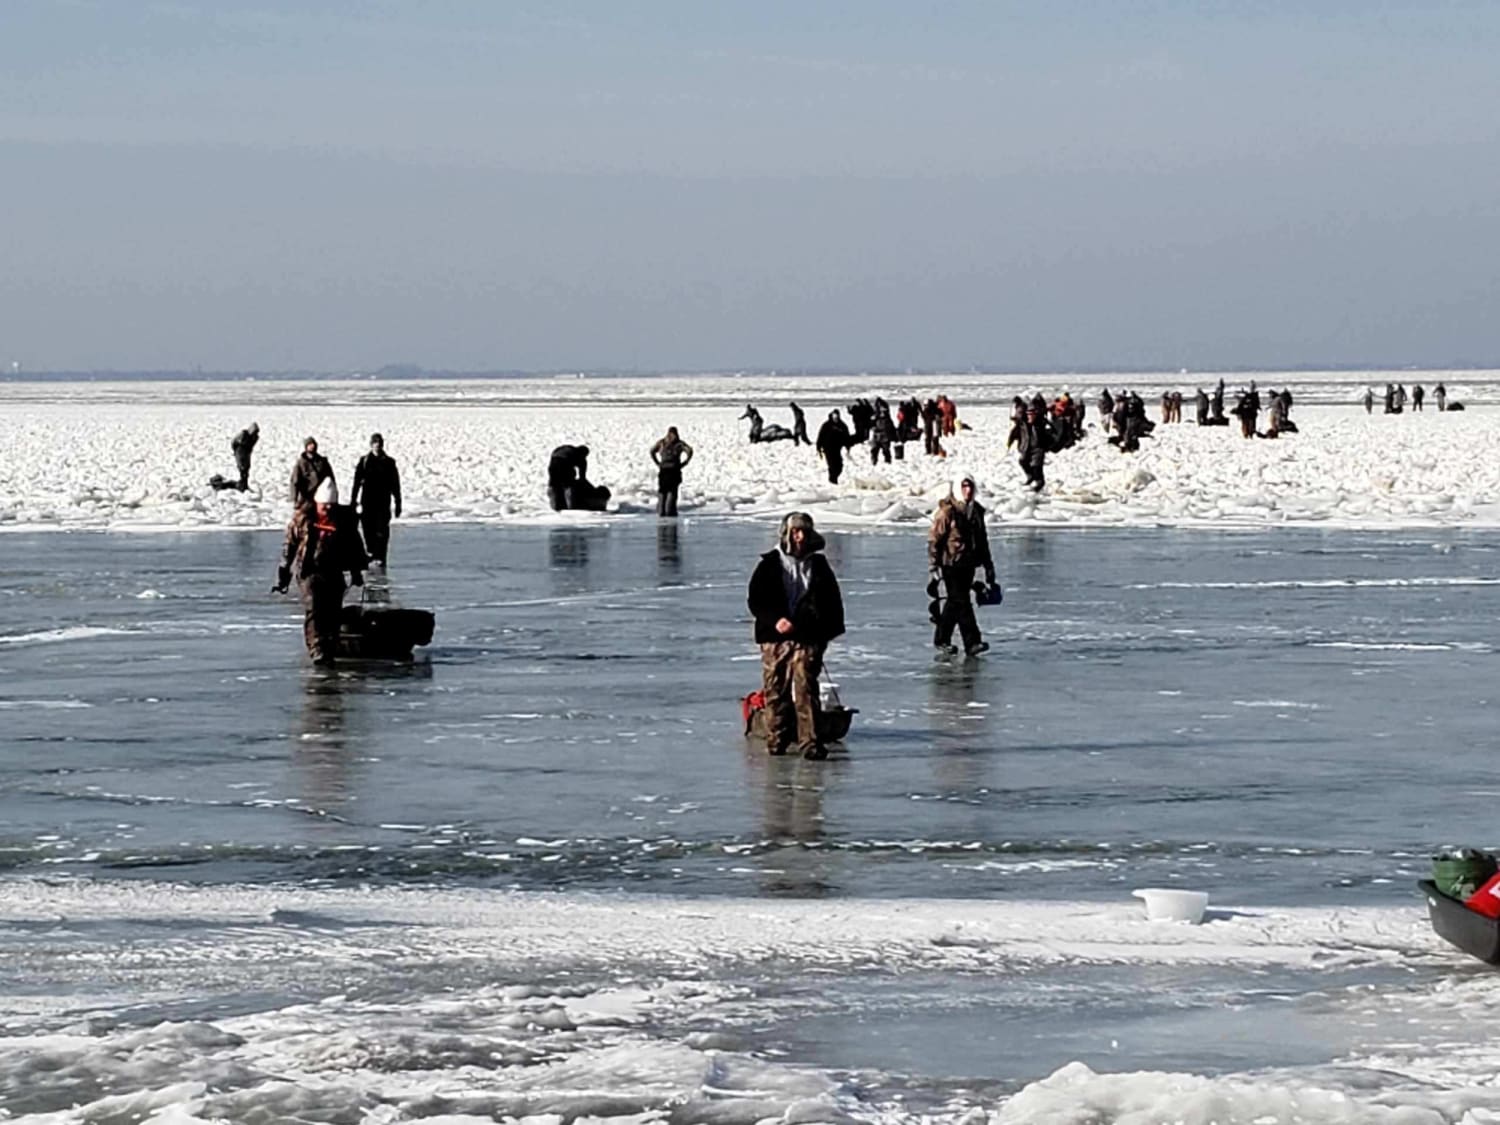 Why the Fisherman flopped — and now is an Islanders hit